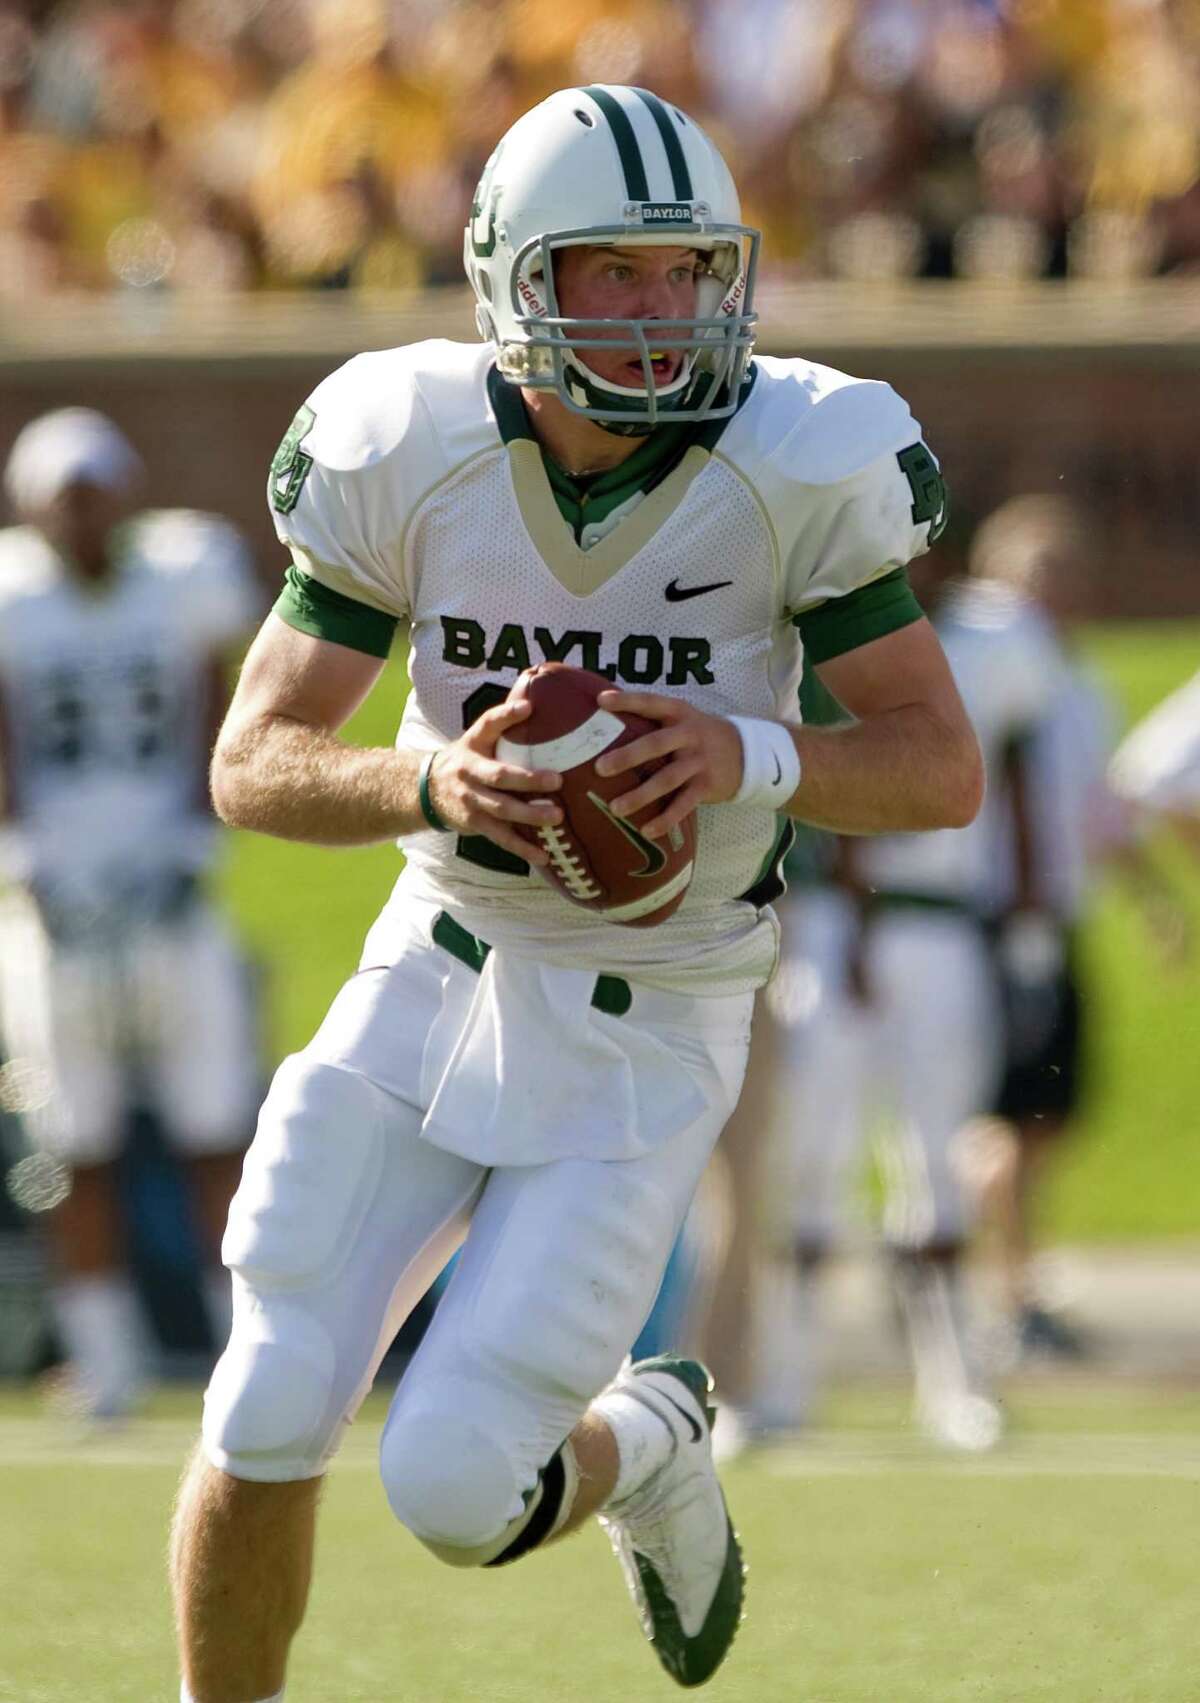 FILE - In this Nov. 7, 2009, file photo, Baylor quarterback Nick Florence tries to find an open receiver as he runs during the first quarter of an NCAA football game against Missouri in Columbia, Mo. The Baylor Bears are looking for Nick Florence to be more than a second-half fill-in for Heisman Trophy winner Robert Griffin III this season. (AP Photo/L.G. Patterson, File)